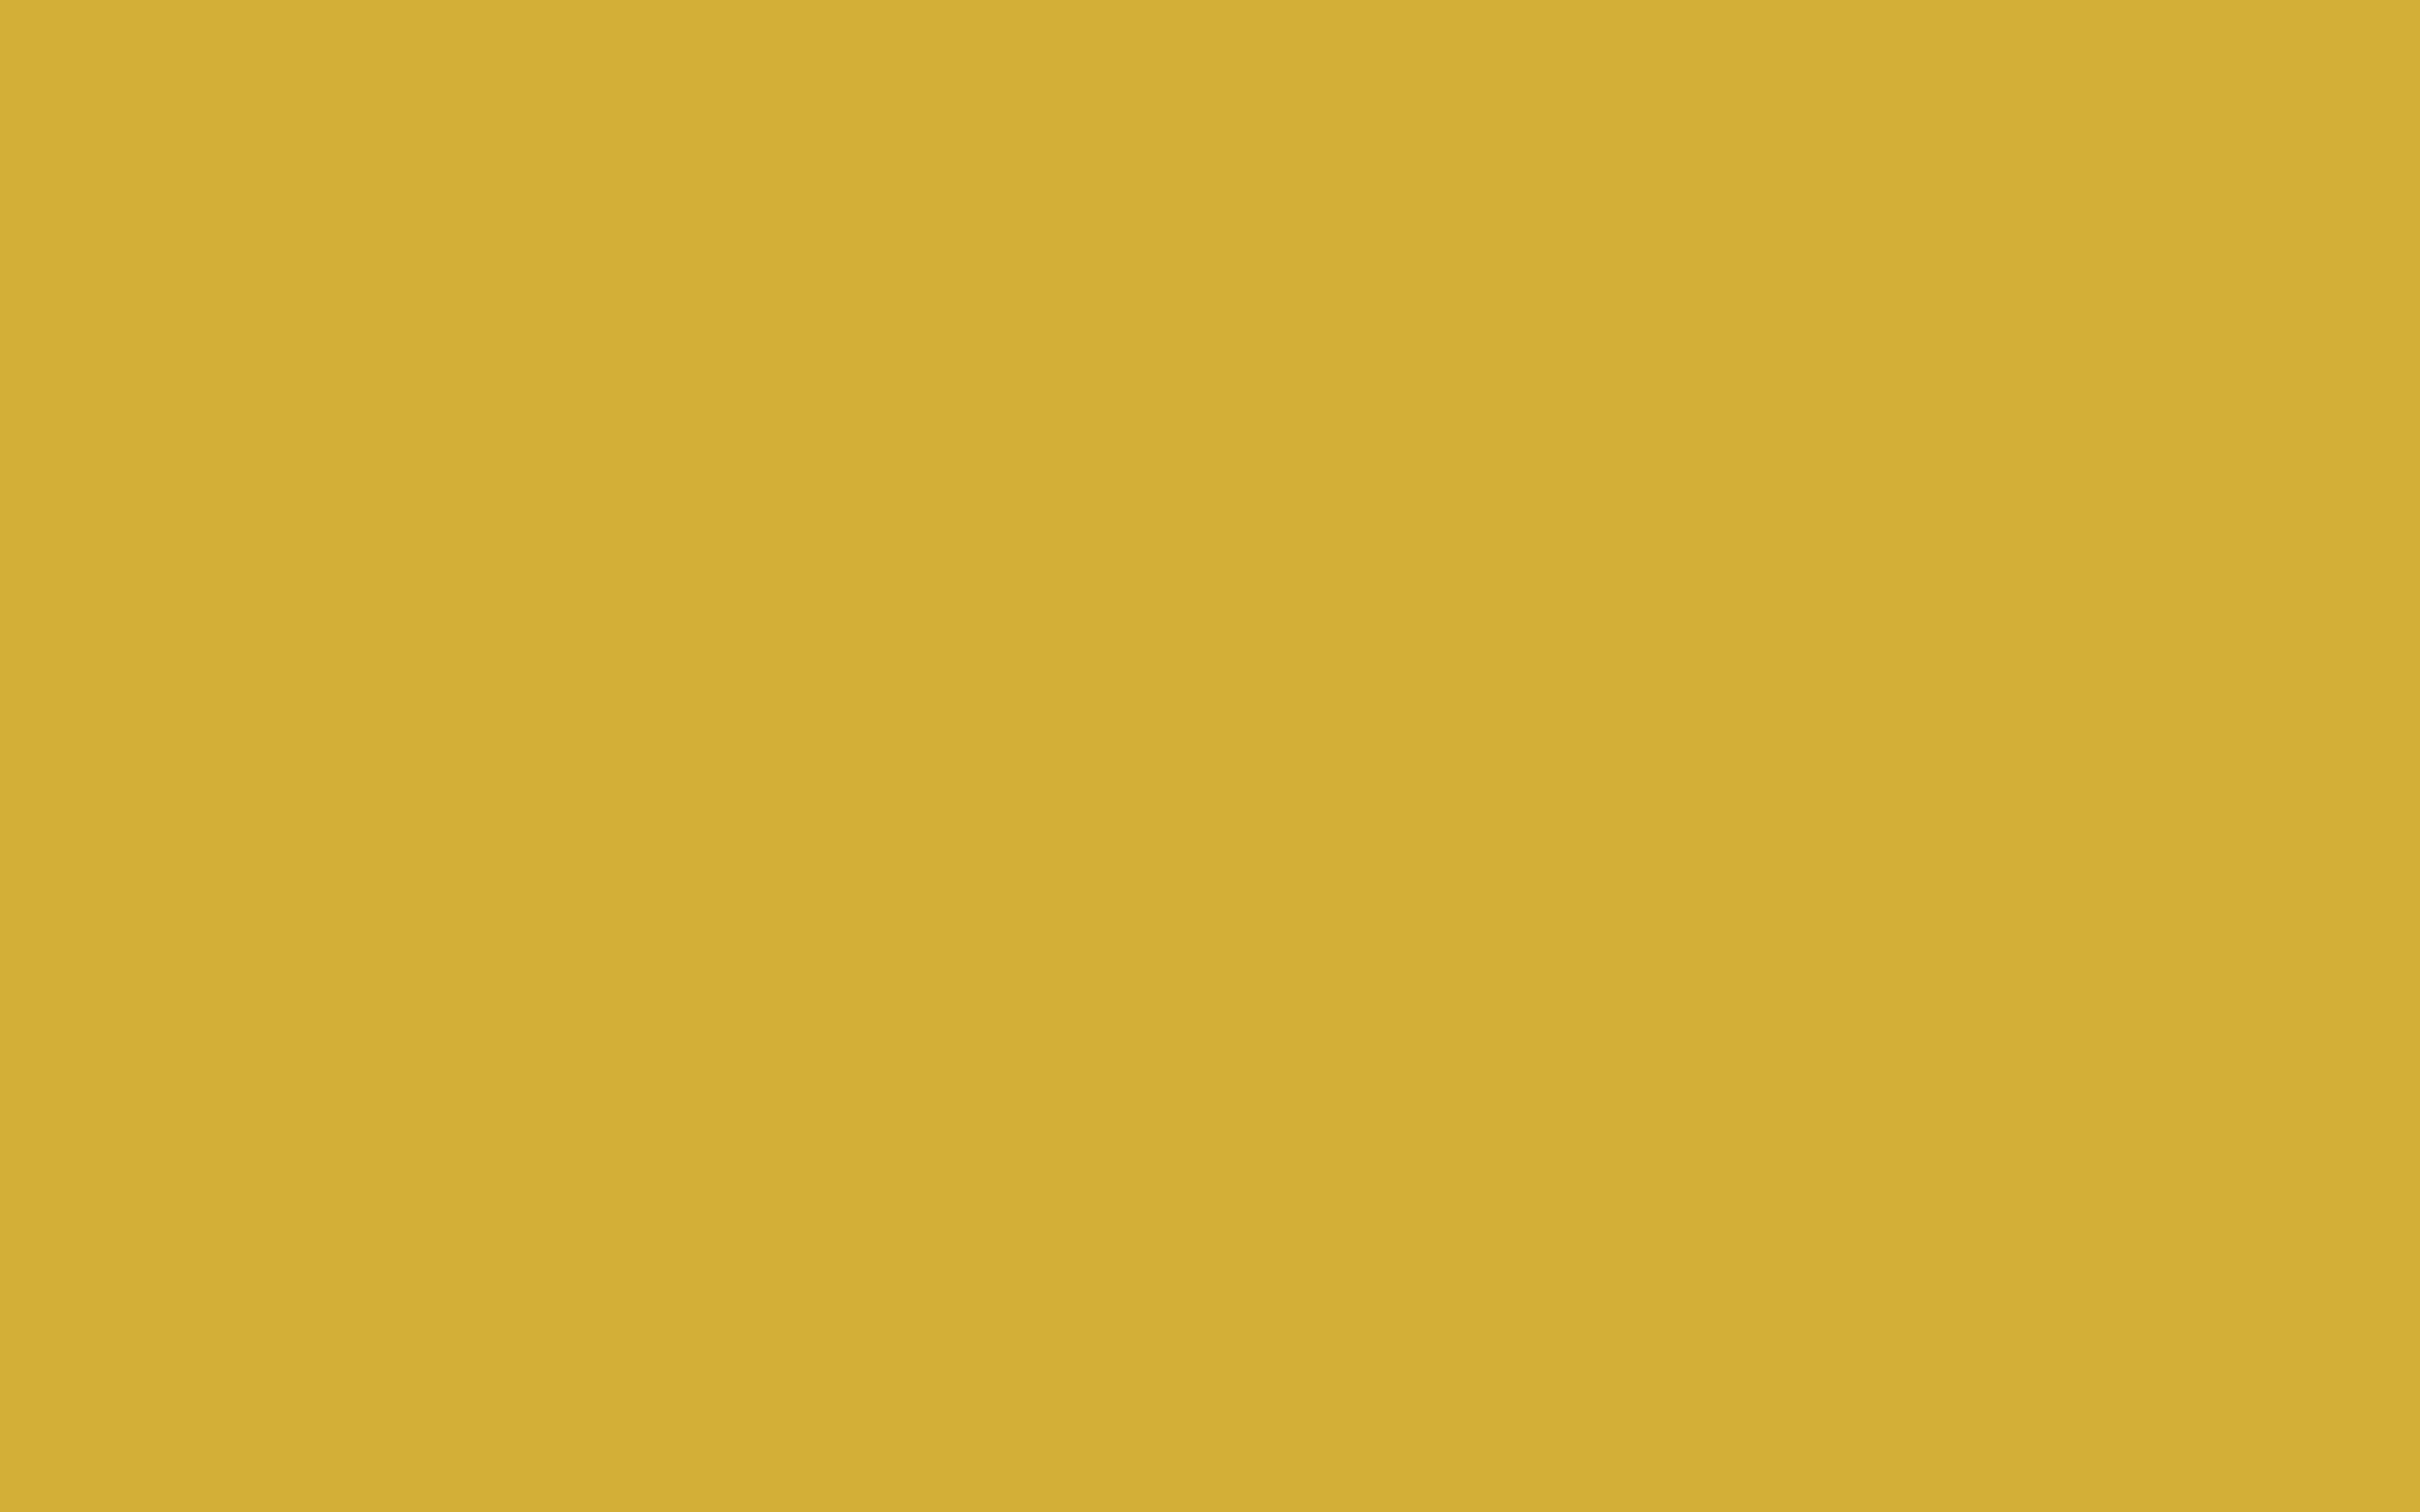 Free 2880x1800 resolution Gold Metallic solid color background view